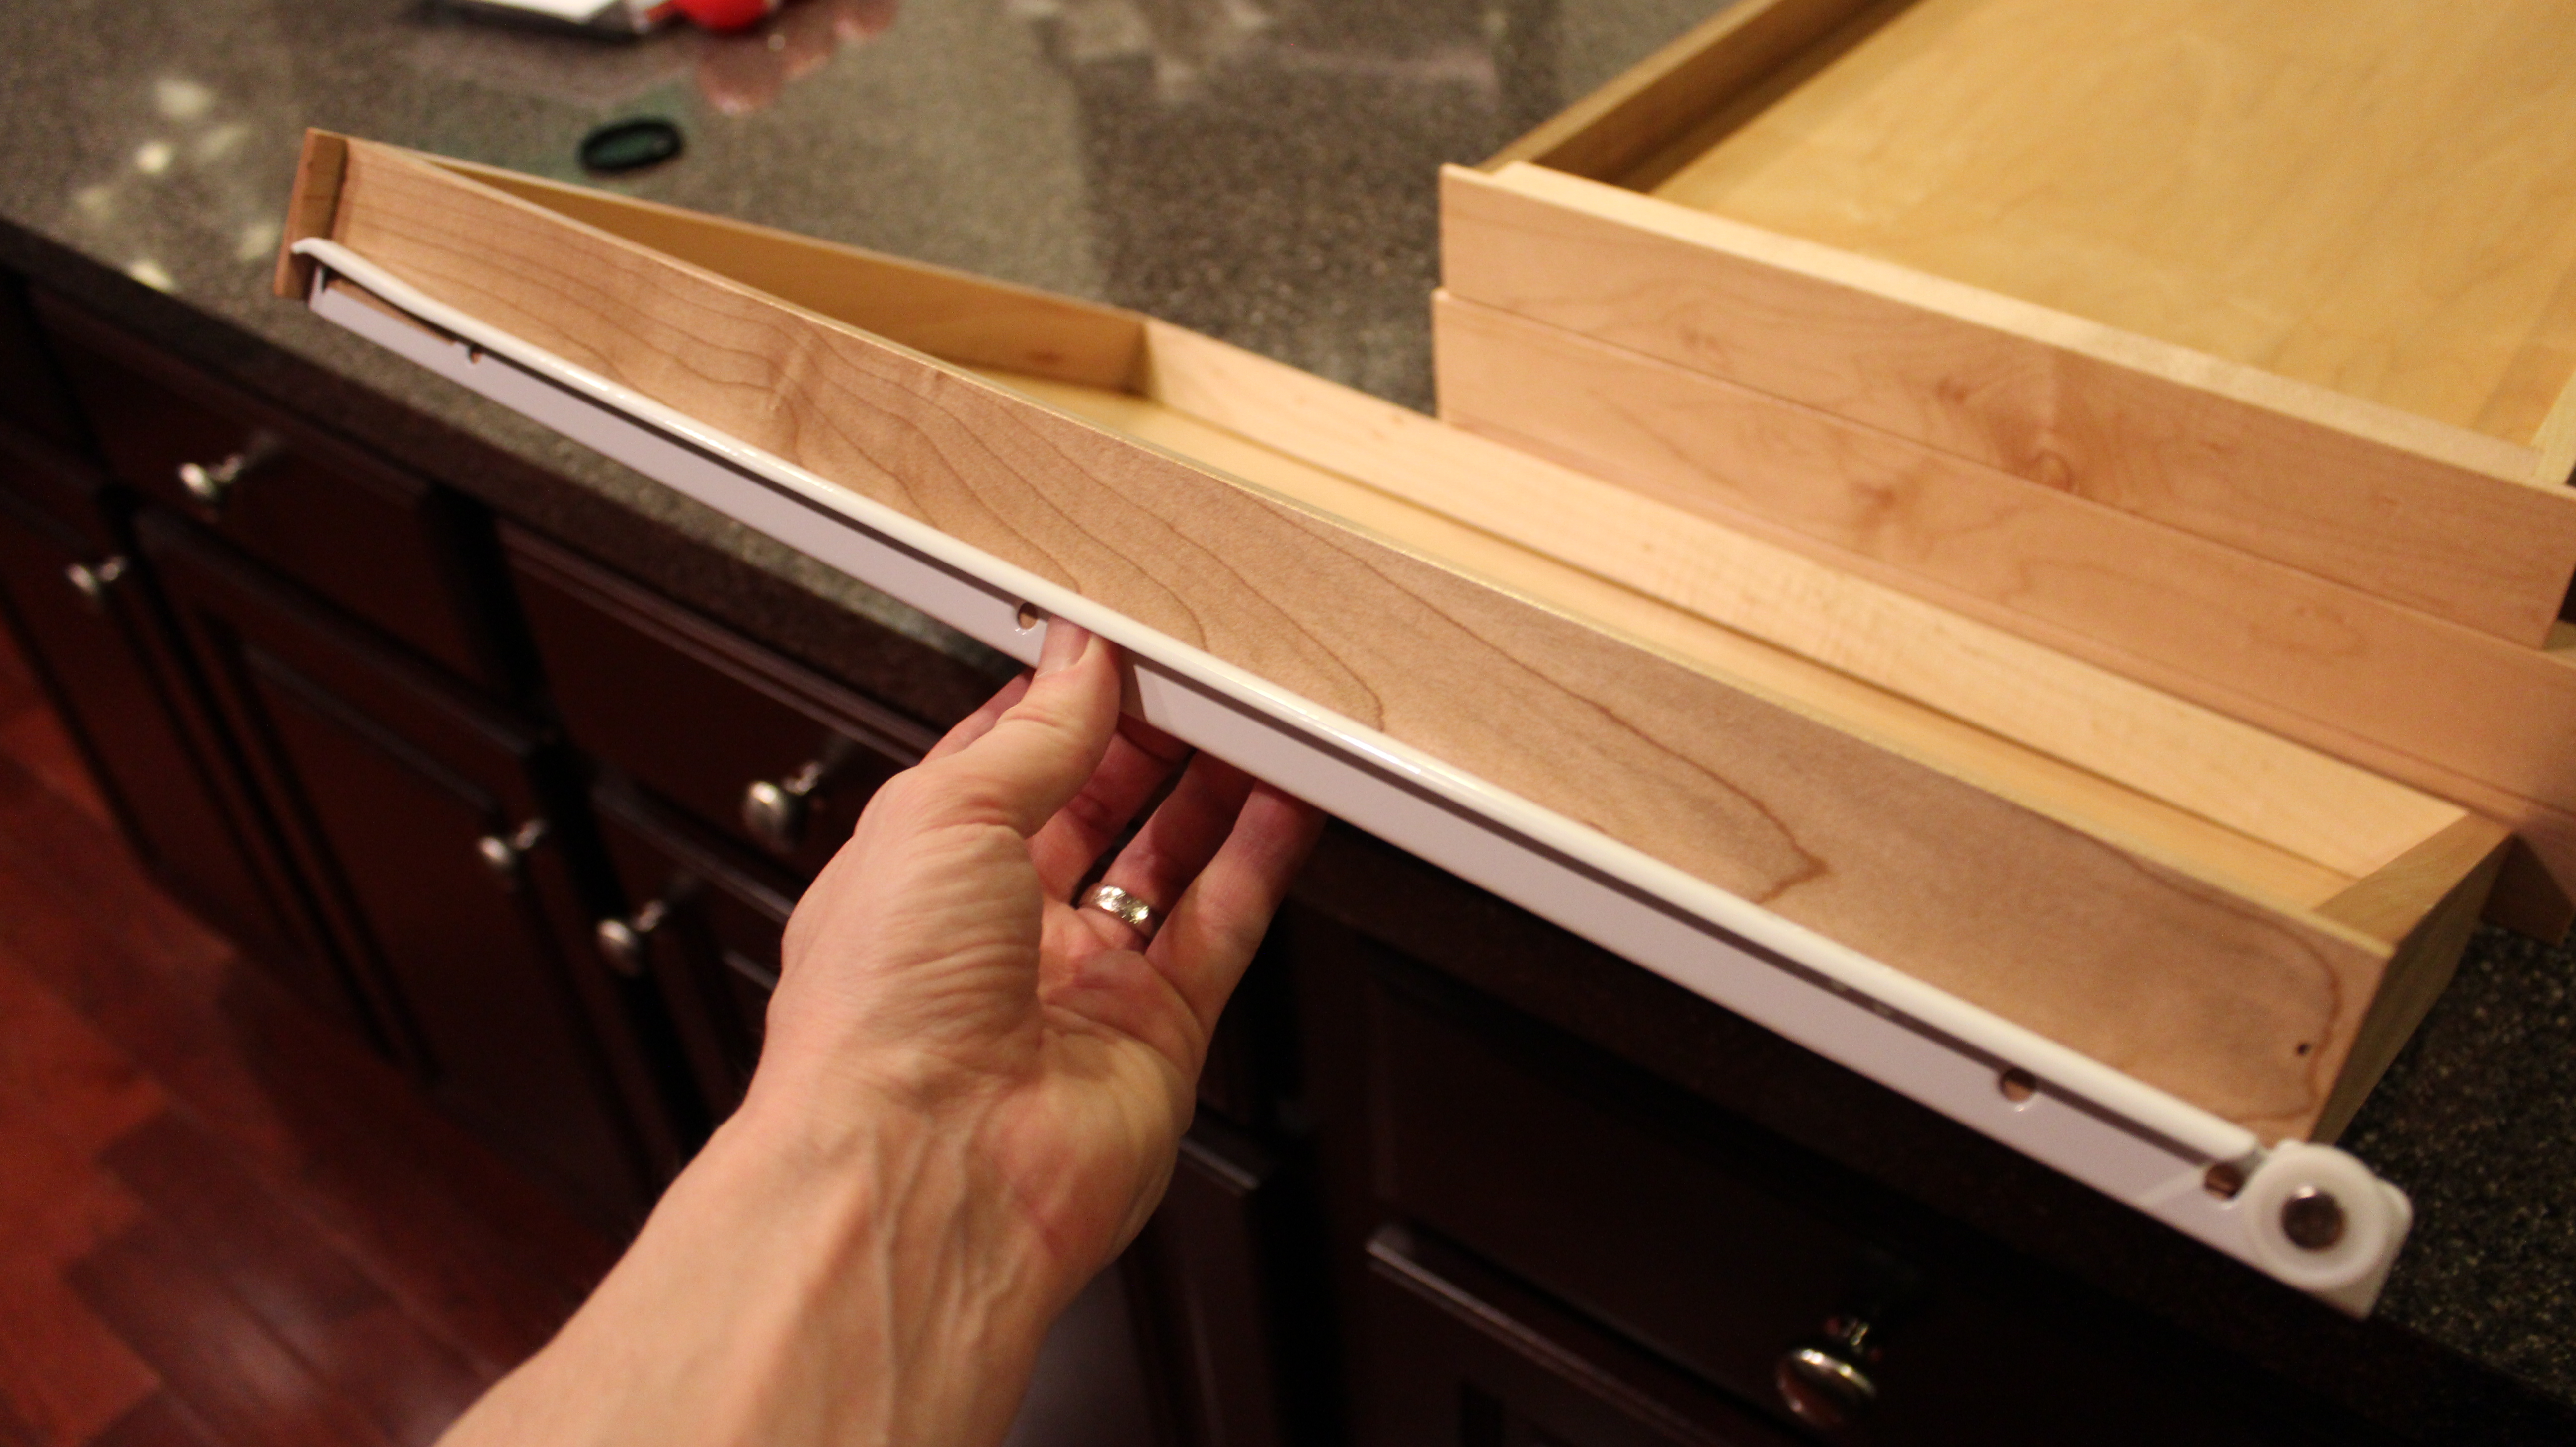 How To Install Kitchen Drawer Slides Our Home from Scratch